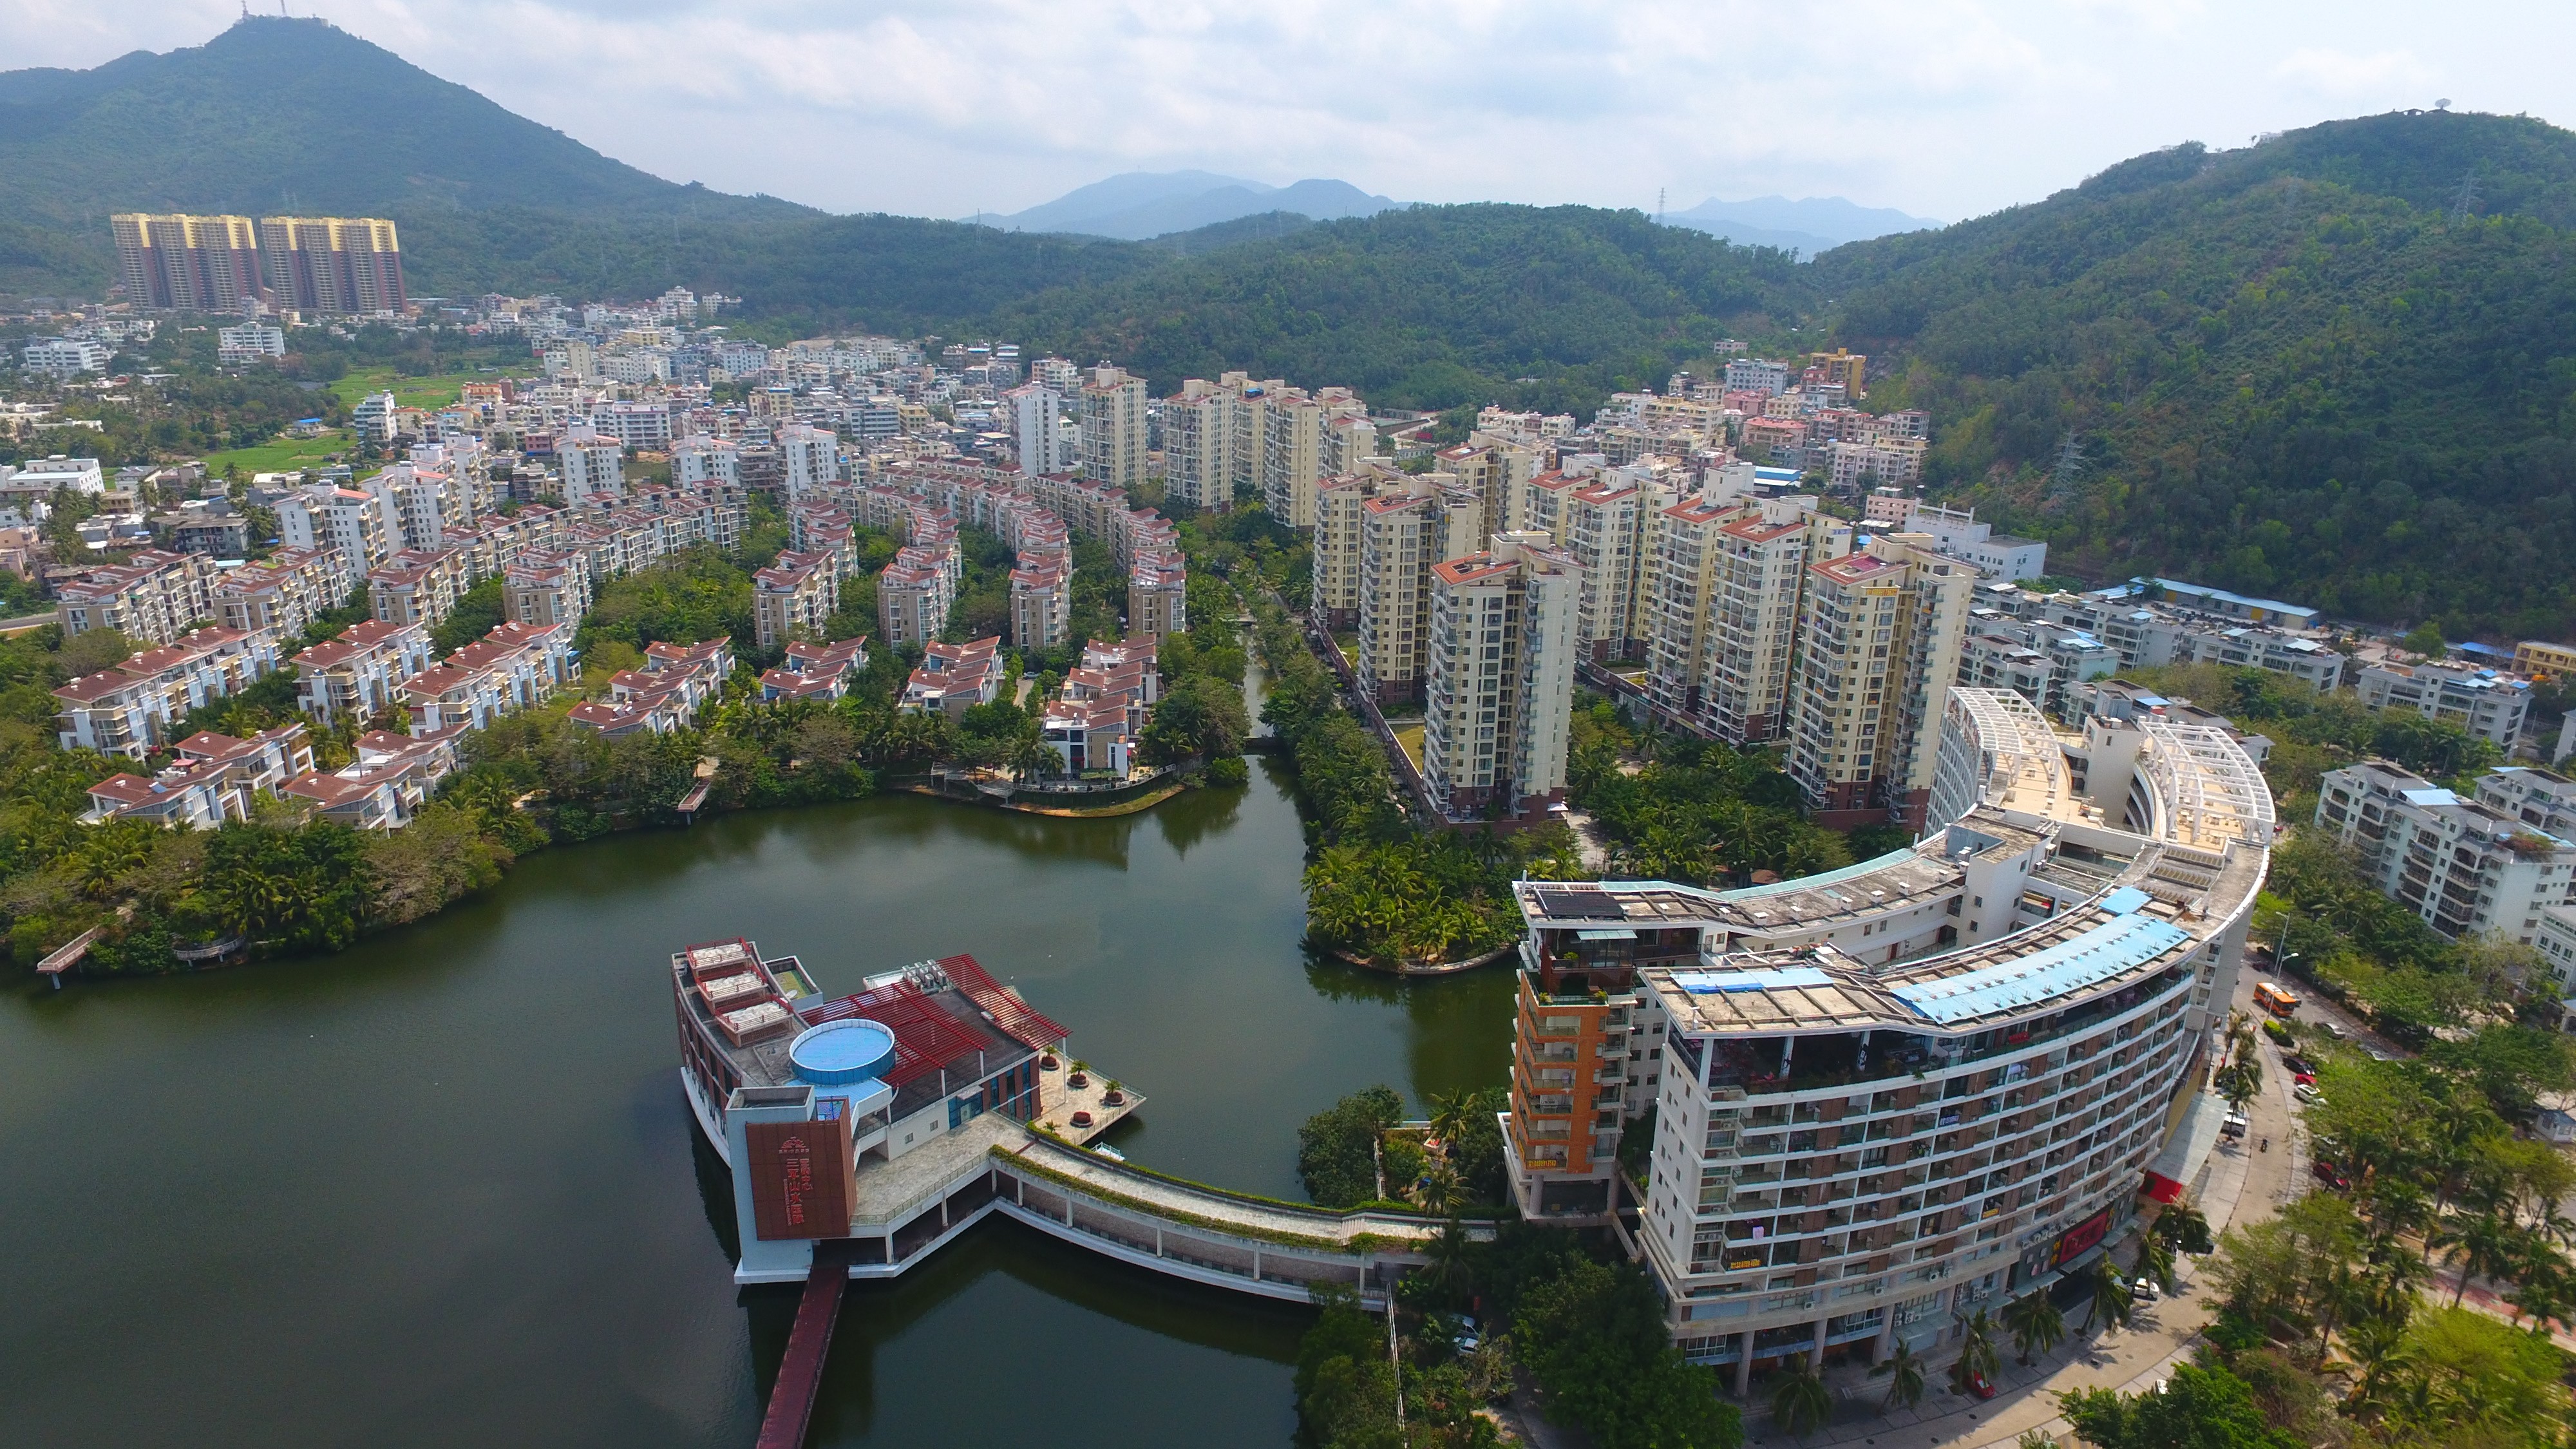 Sanya has a steady pipeline of new real estate projects to meet that demand. Photo: ImagineChina